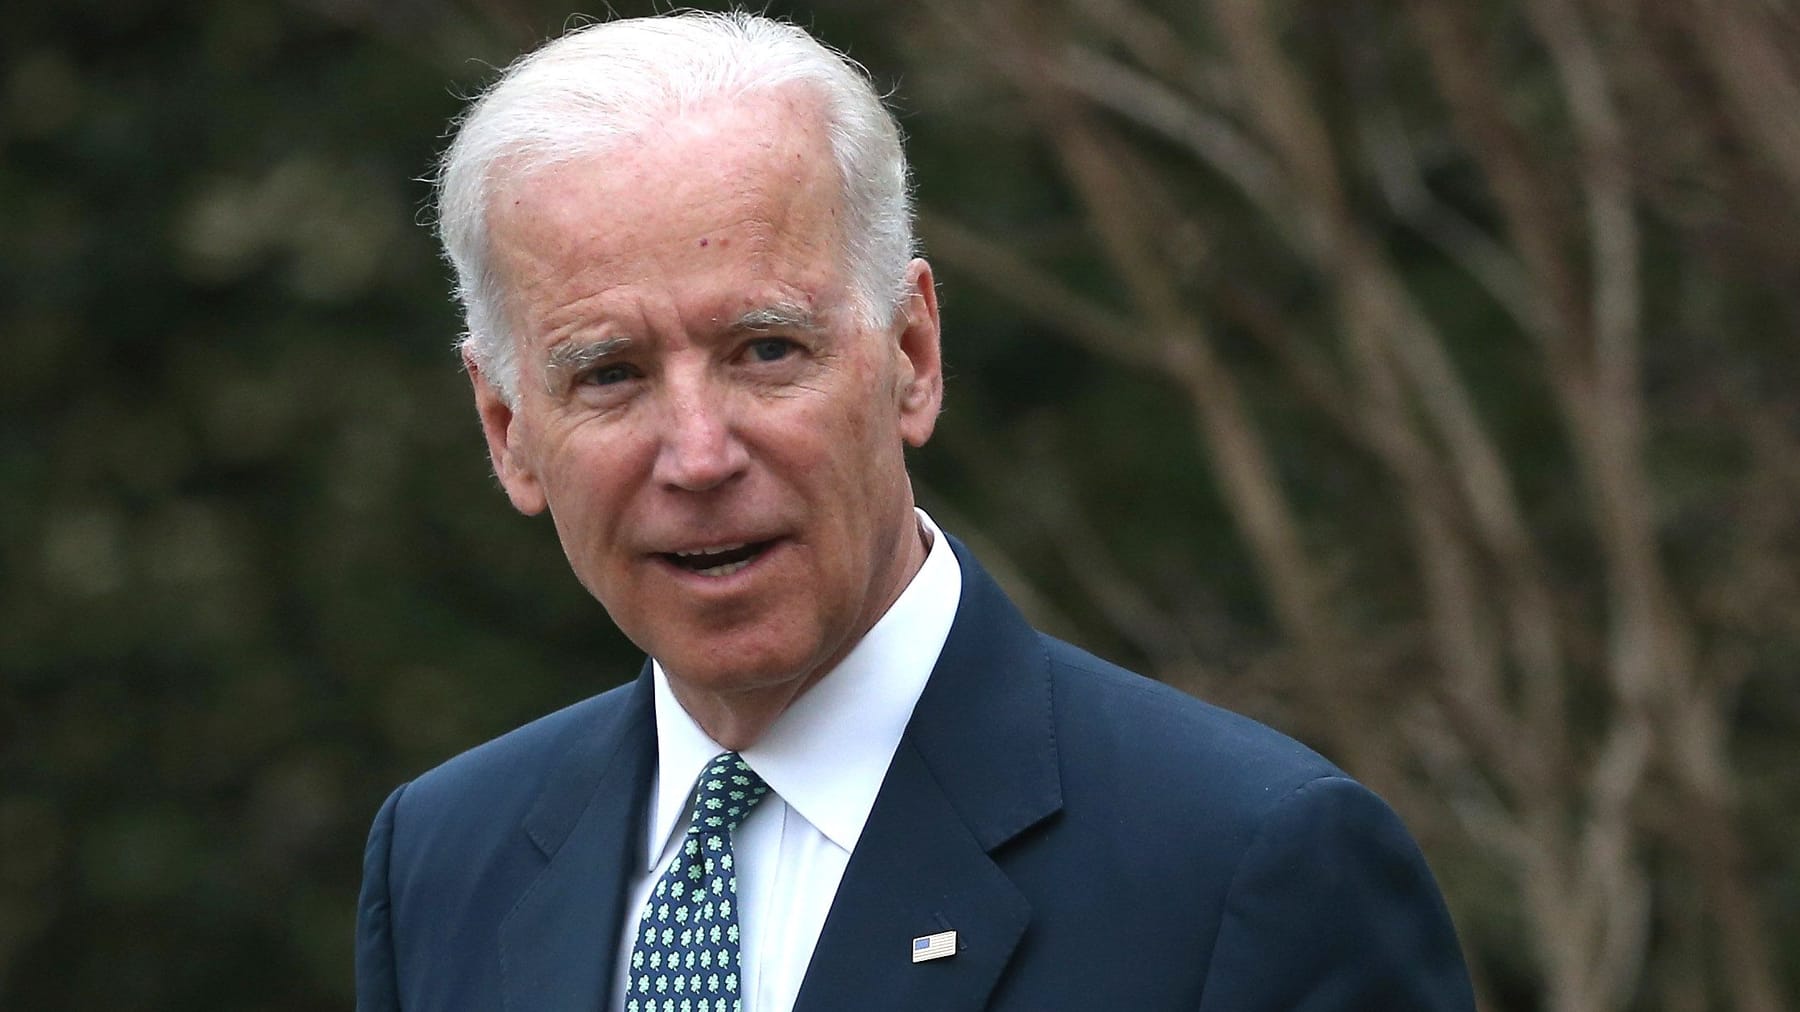 Joe Biden throws a party at the White House – the bar pulls up empty